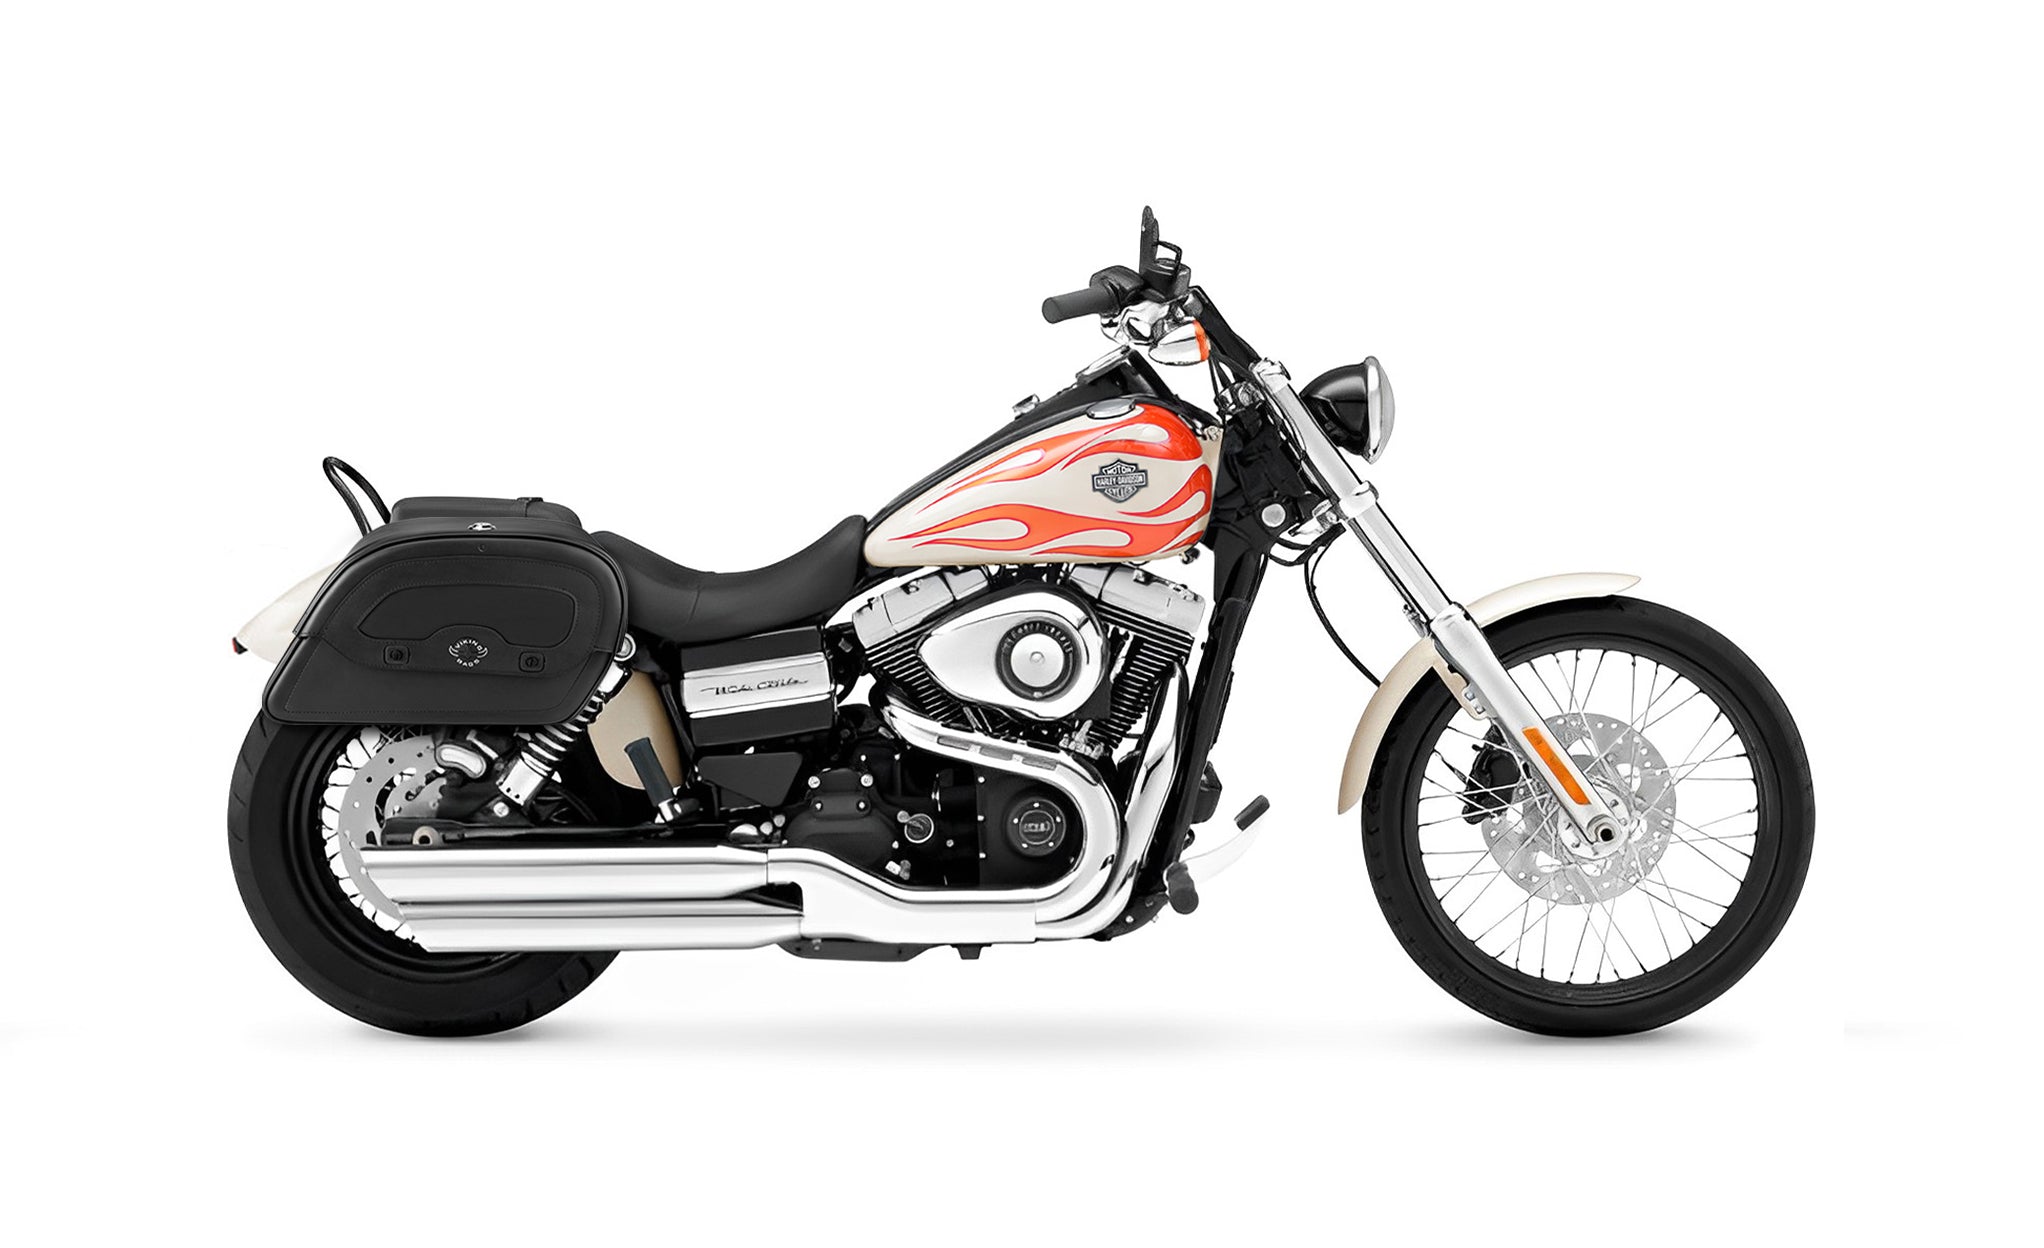 22L - Warrior Medium Quick-Mount Motorcycle Saddlebags For Harley Dyna Wide Glide FXDWG @expand